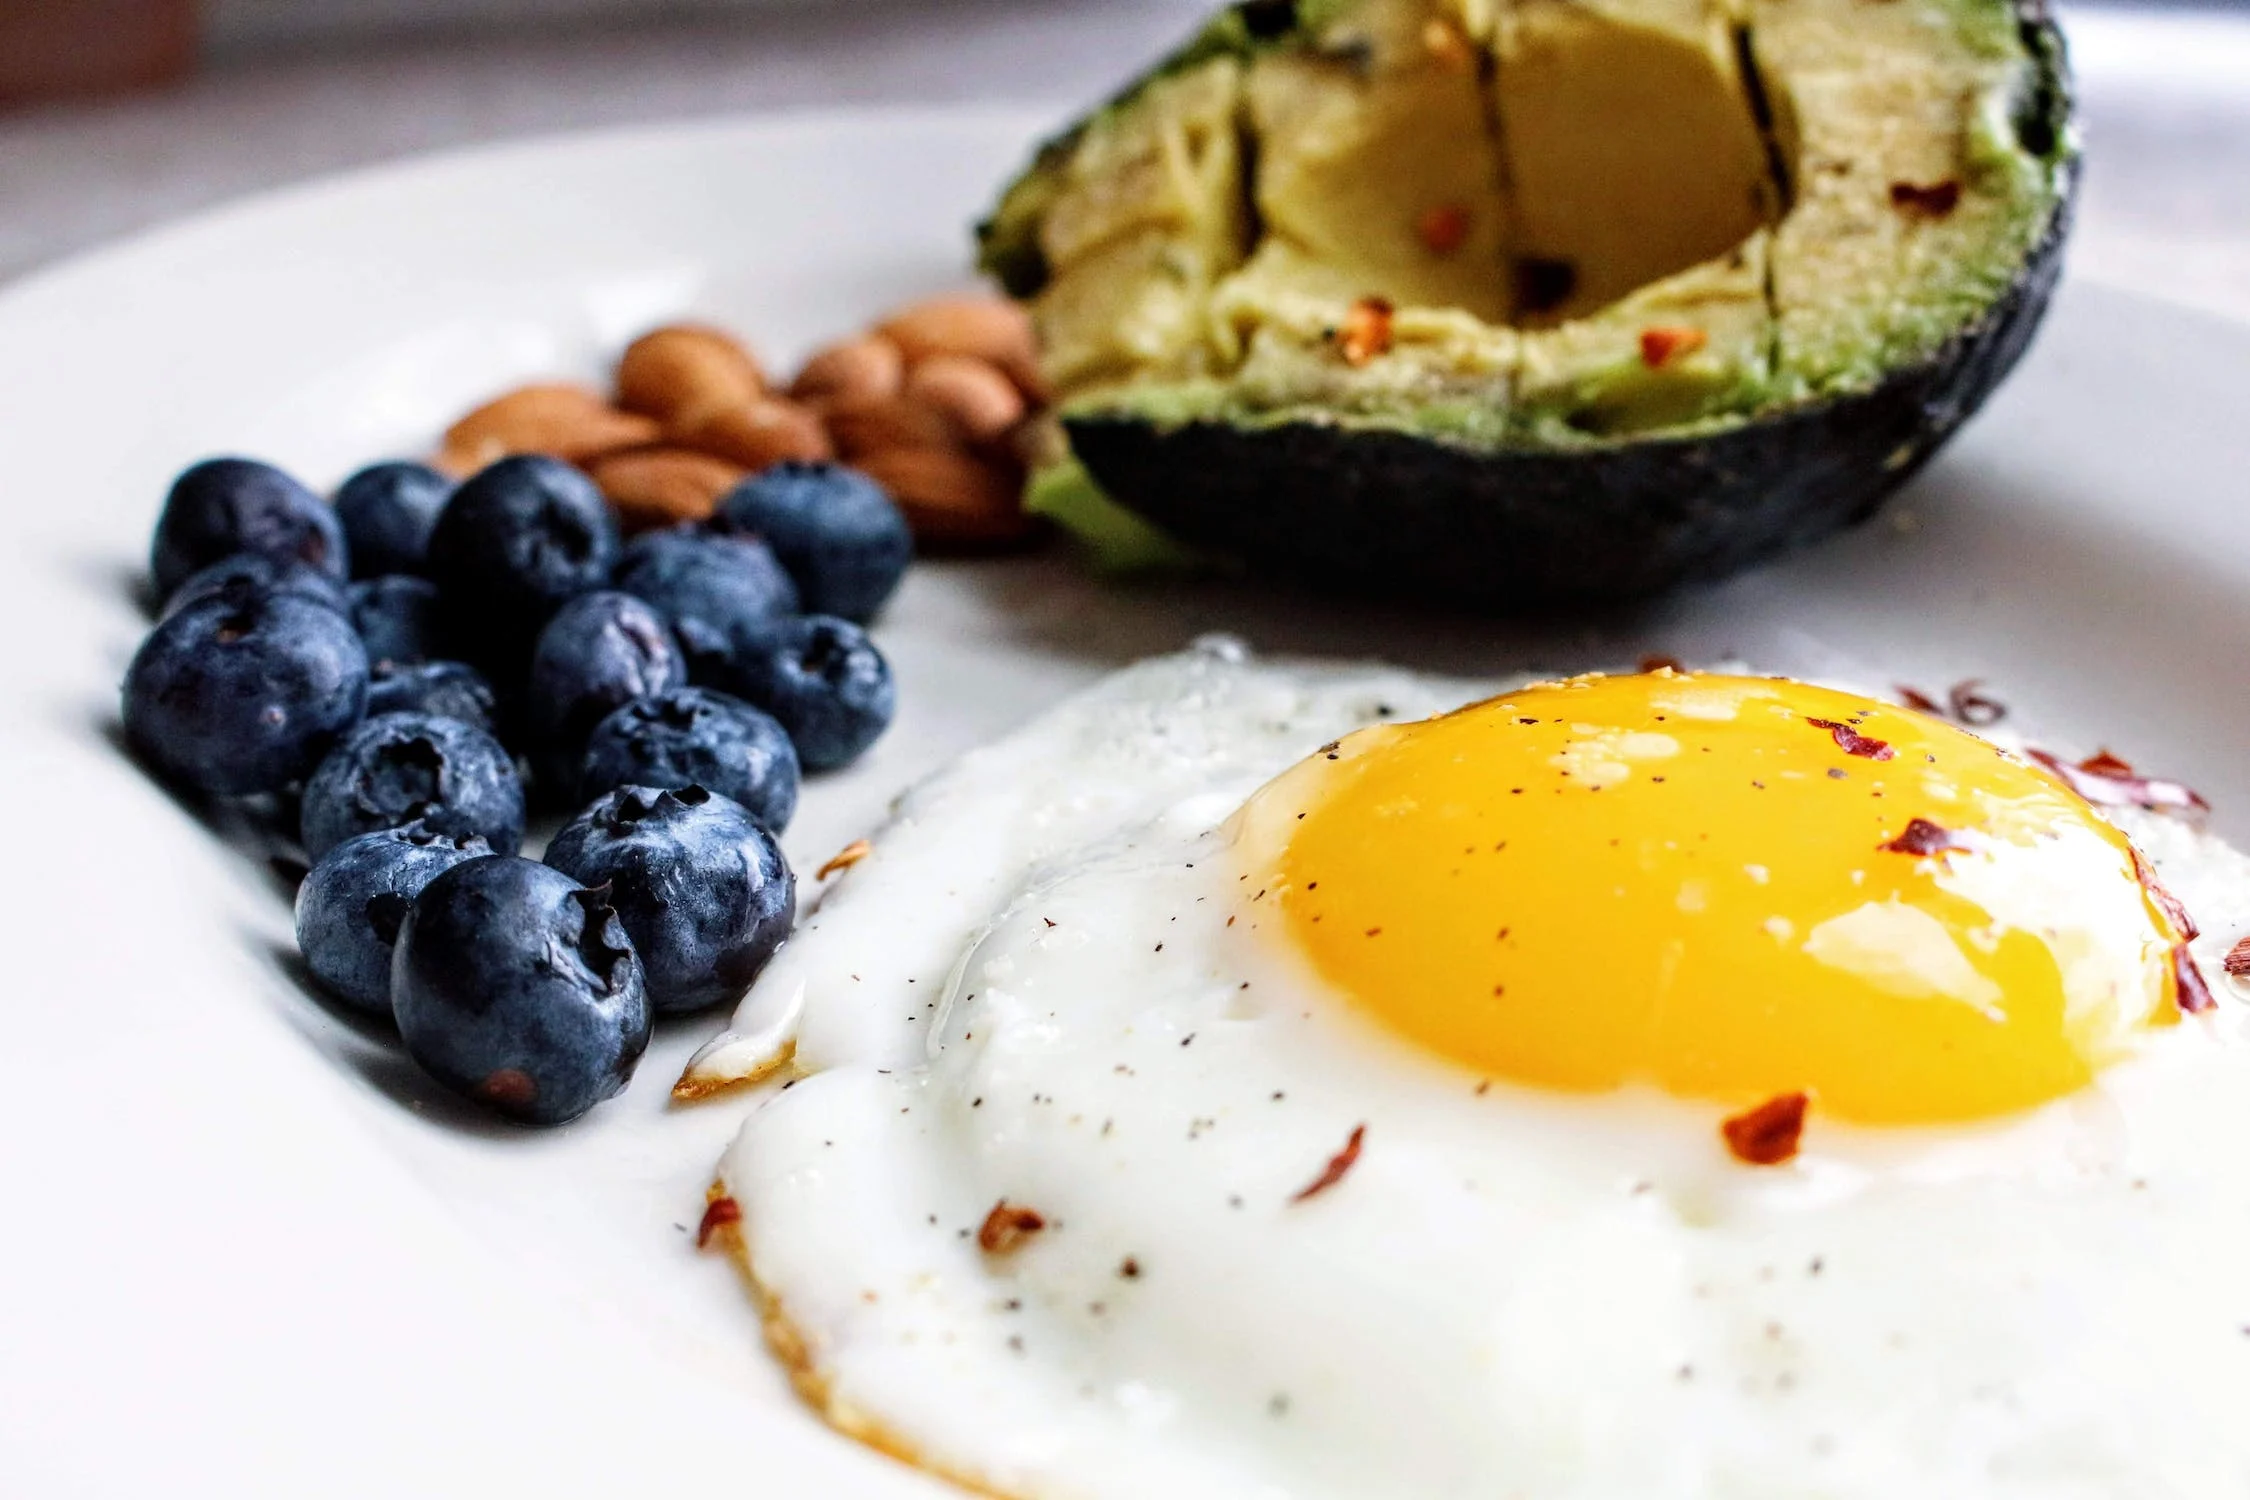 Is A Keto Diet Optimal For Everyone?